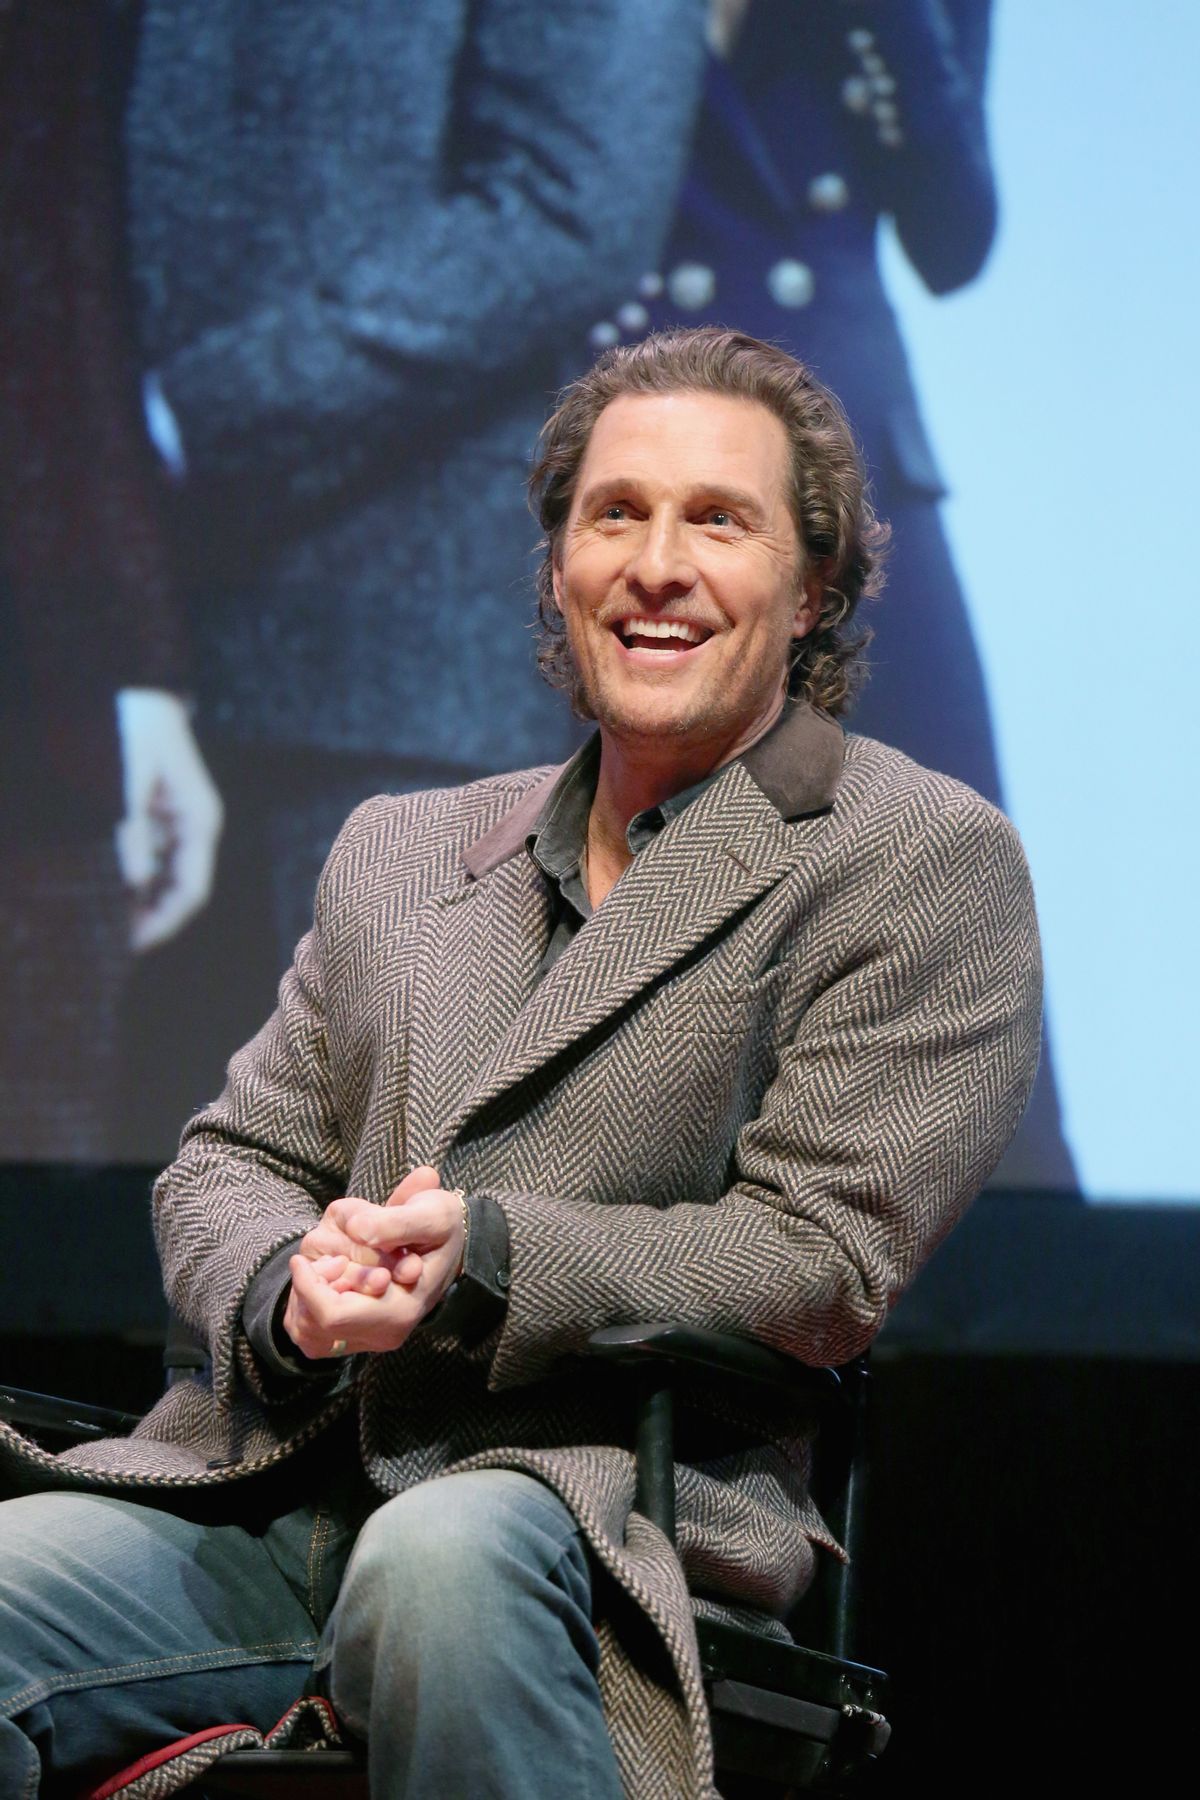 AUSTIN, TEXAS - JANUARY 21:  Matthew McConaughey participates in a Q&amp;A after a special screening of his new film "The Gentlemen" at Hogg Memorial Auditorium at The University of Texas at Austin on January 21, 2020 in Austin, Texas.  (Photo by Gary Miller/Getty Images) (Gary Miller/Getty Images)